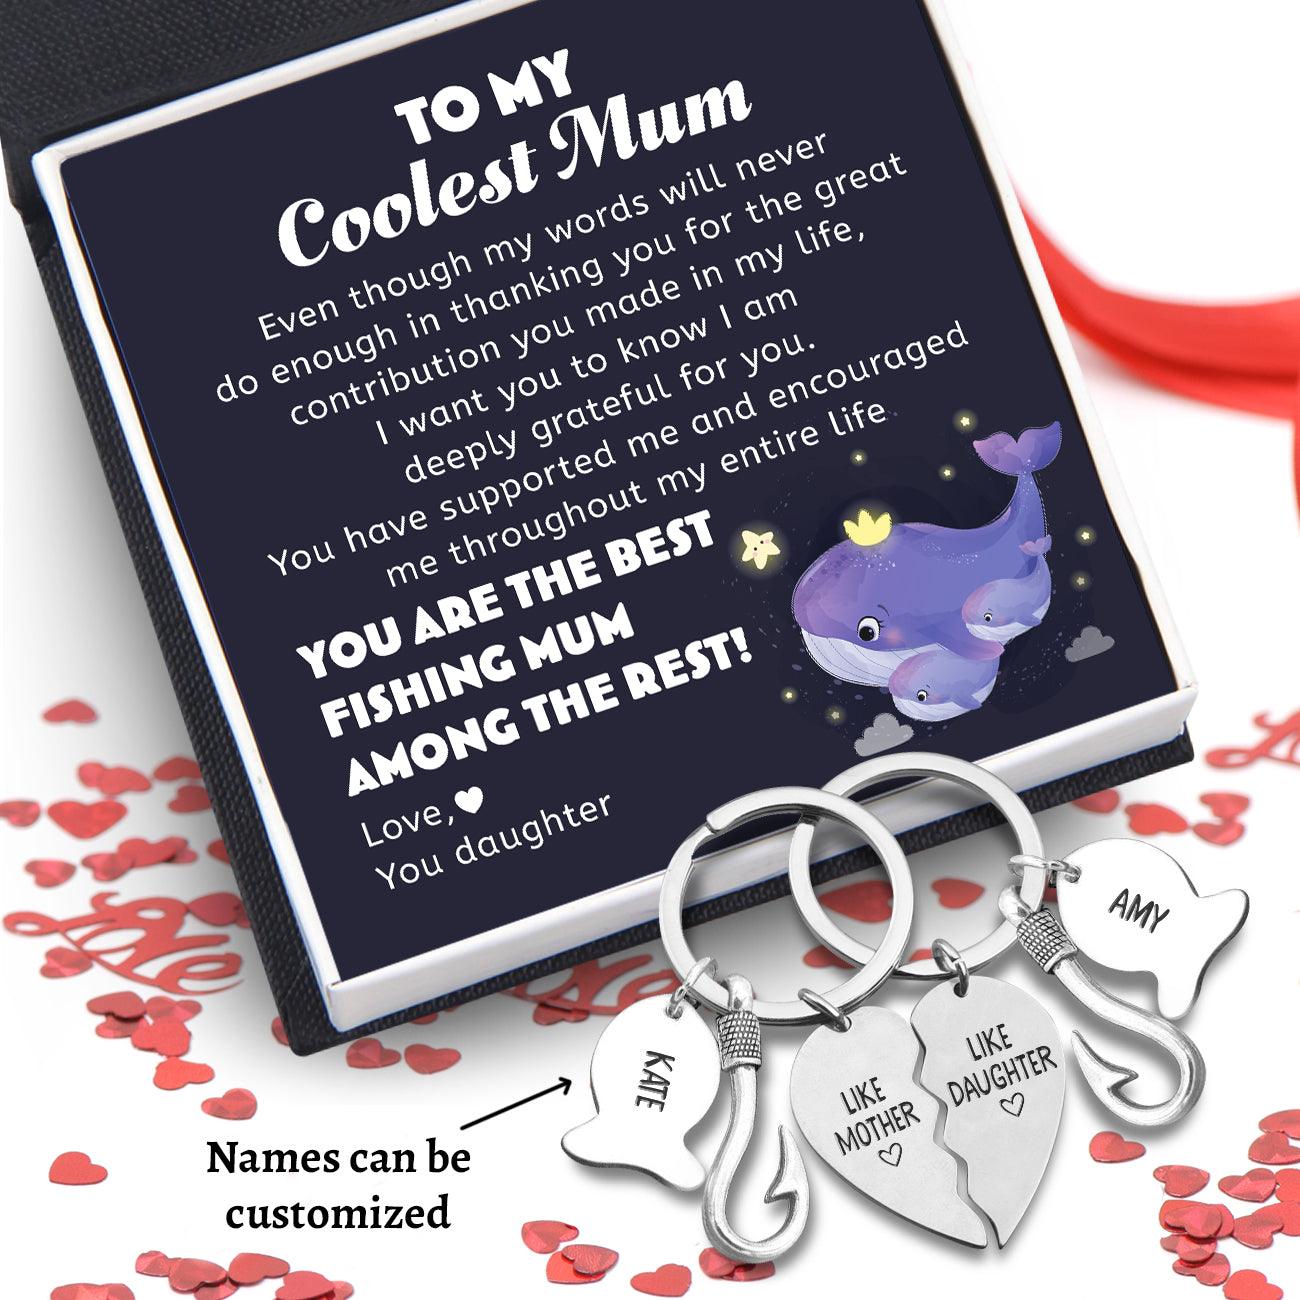 Personalised Fishing Heart Puzzle Keychains - Fishing - To My Coolest Mum - From Daughter - You Are The Best Fishing Mum Among The Rest - Augkbn19001 - Gifts Holder